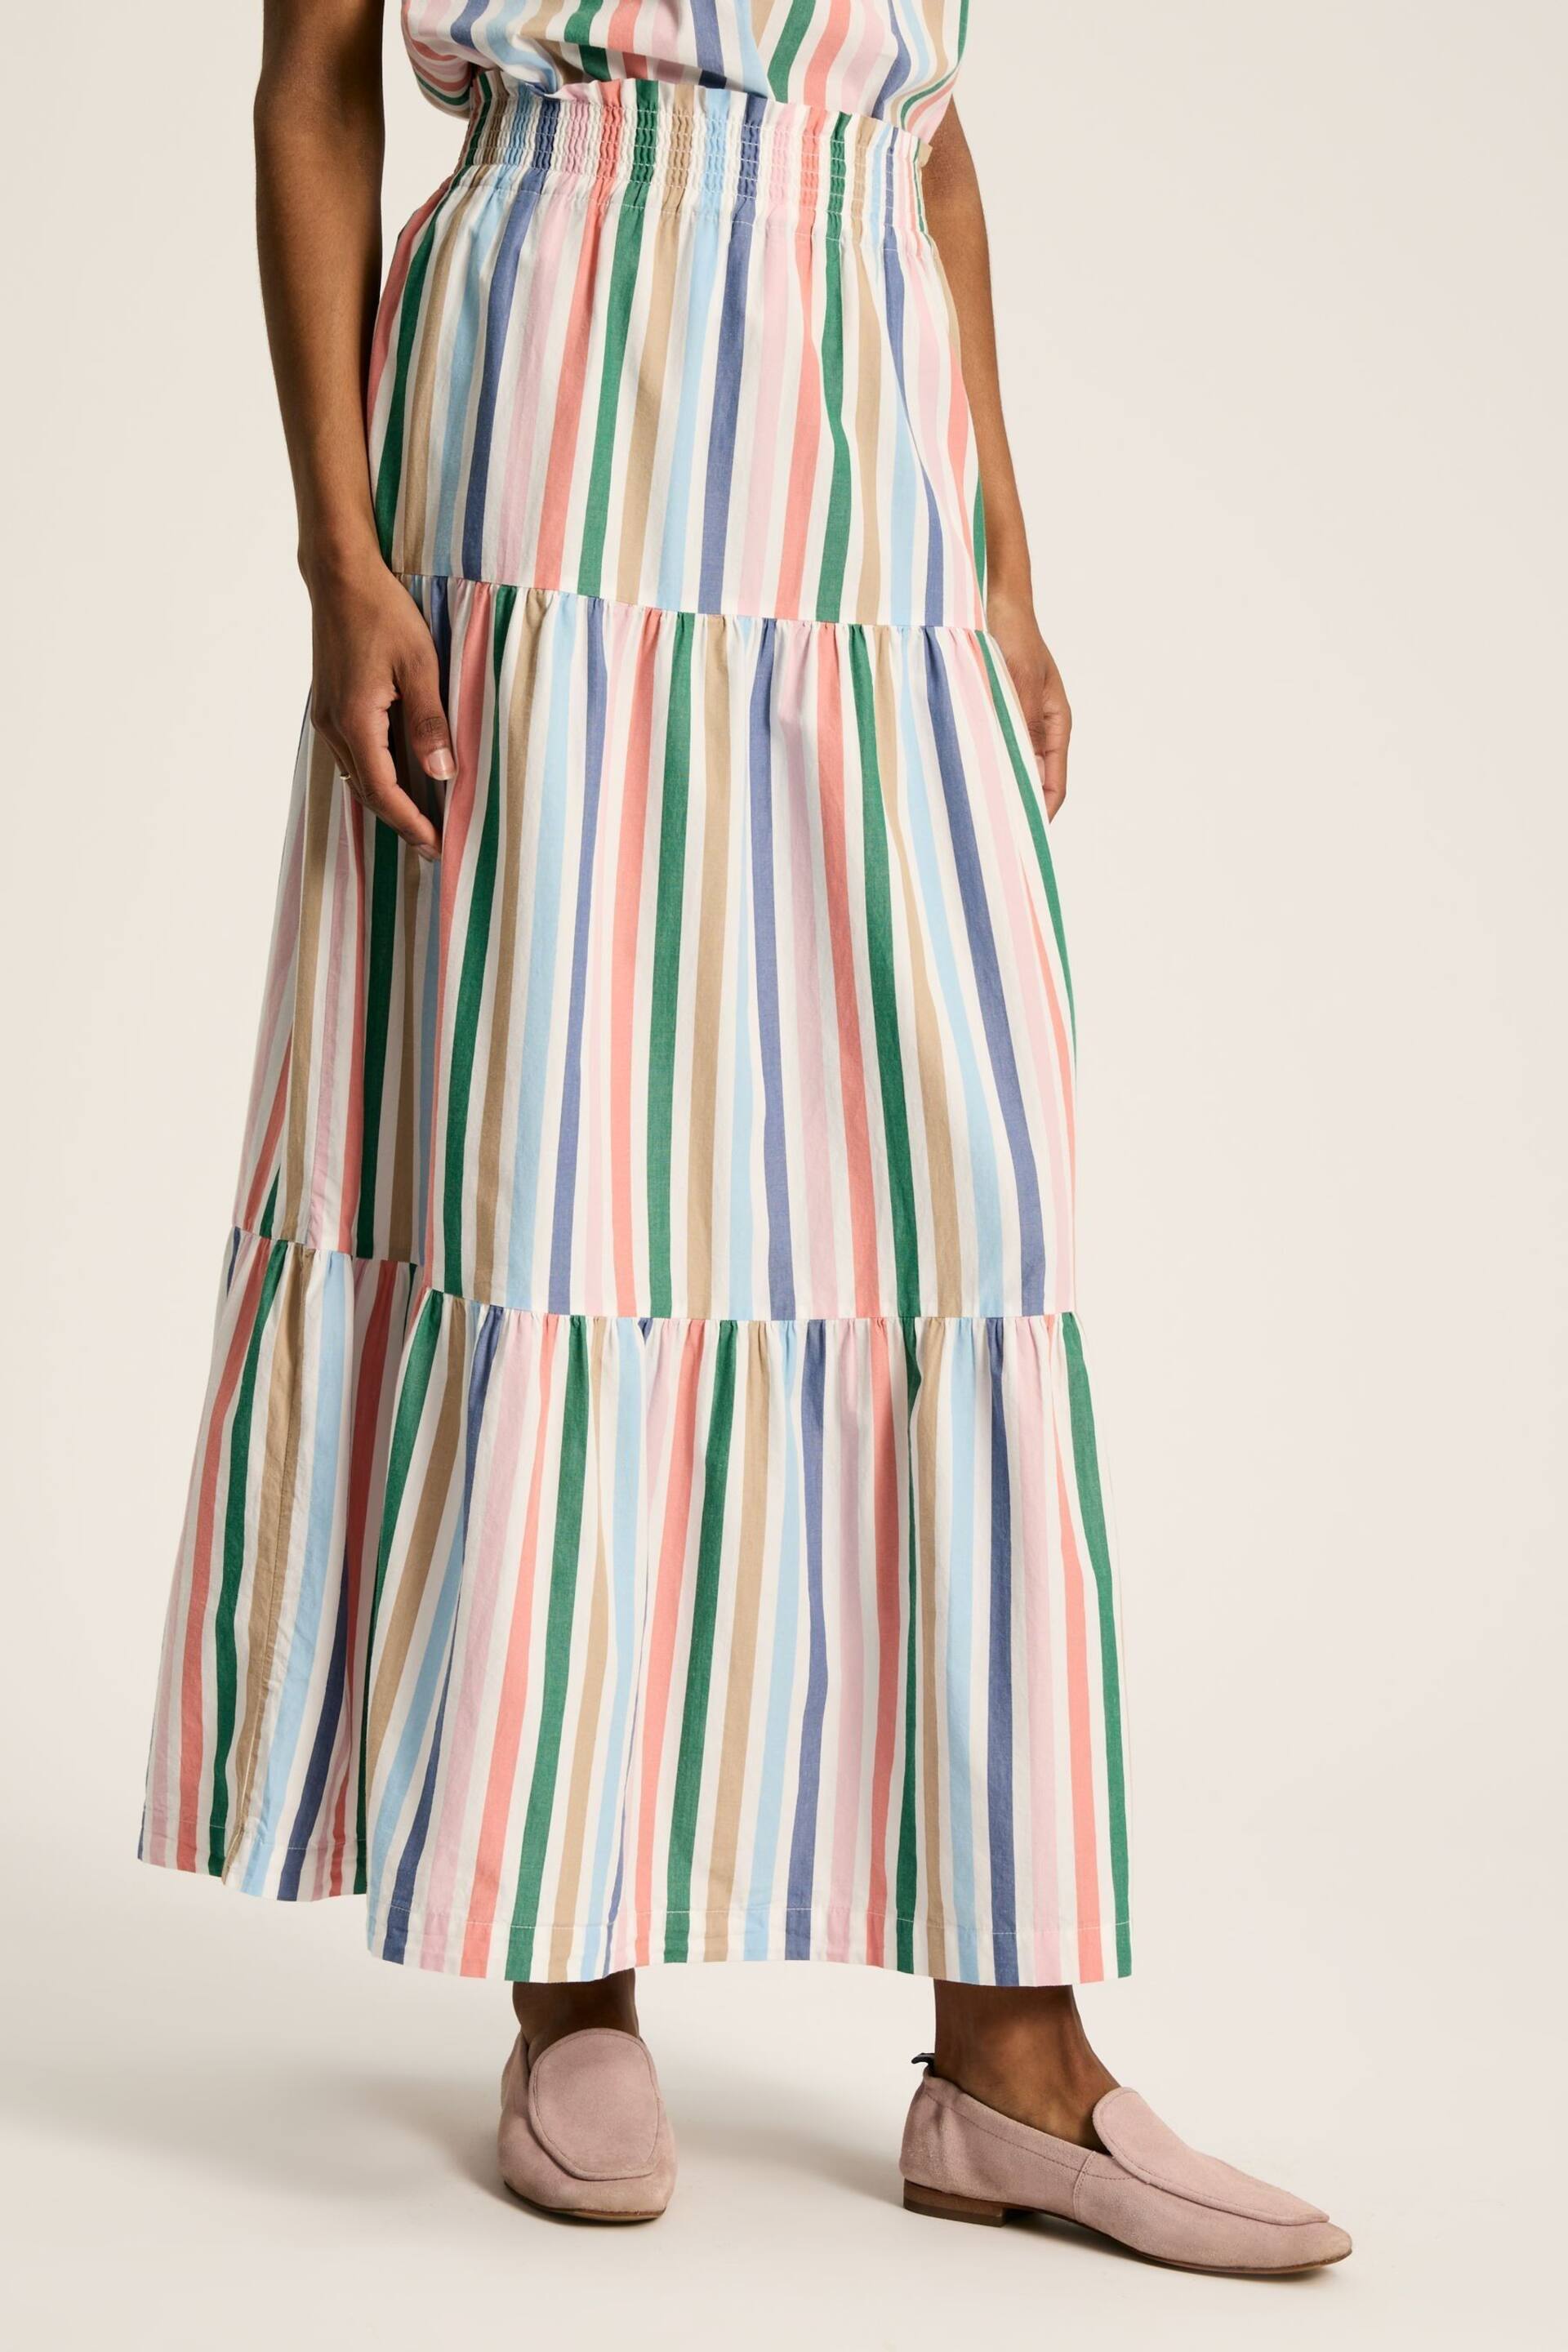 Joules Cynthia Stripe Tiered Co-ord Skirt - Image 1 of 8